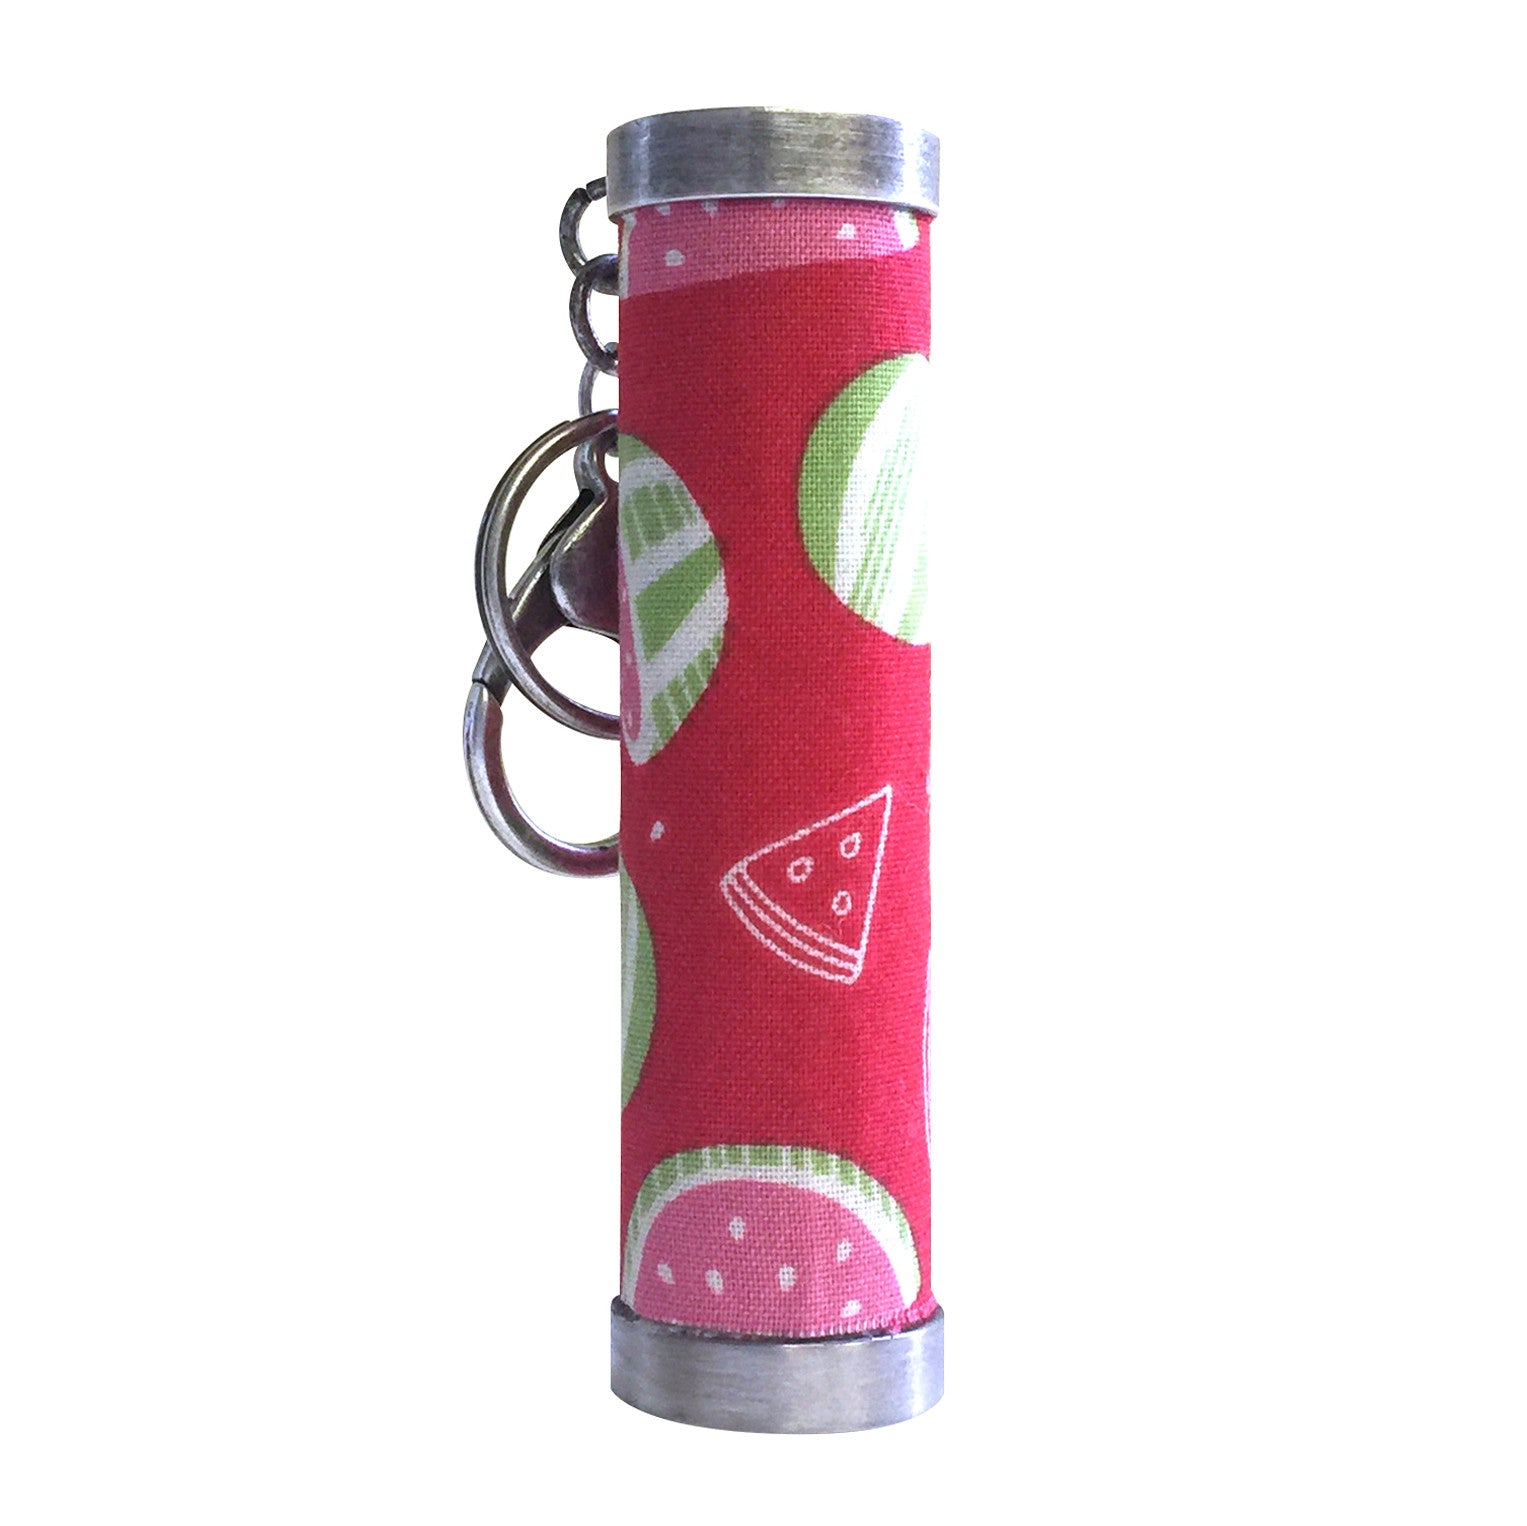 Juicy Watermelon (with key ring and clip)